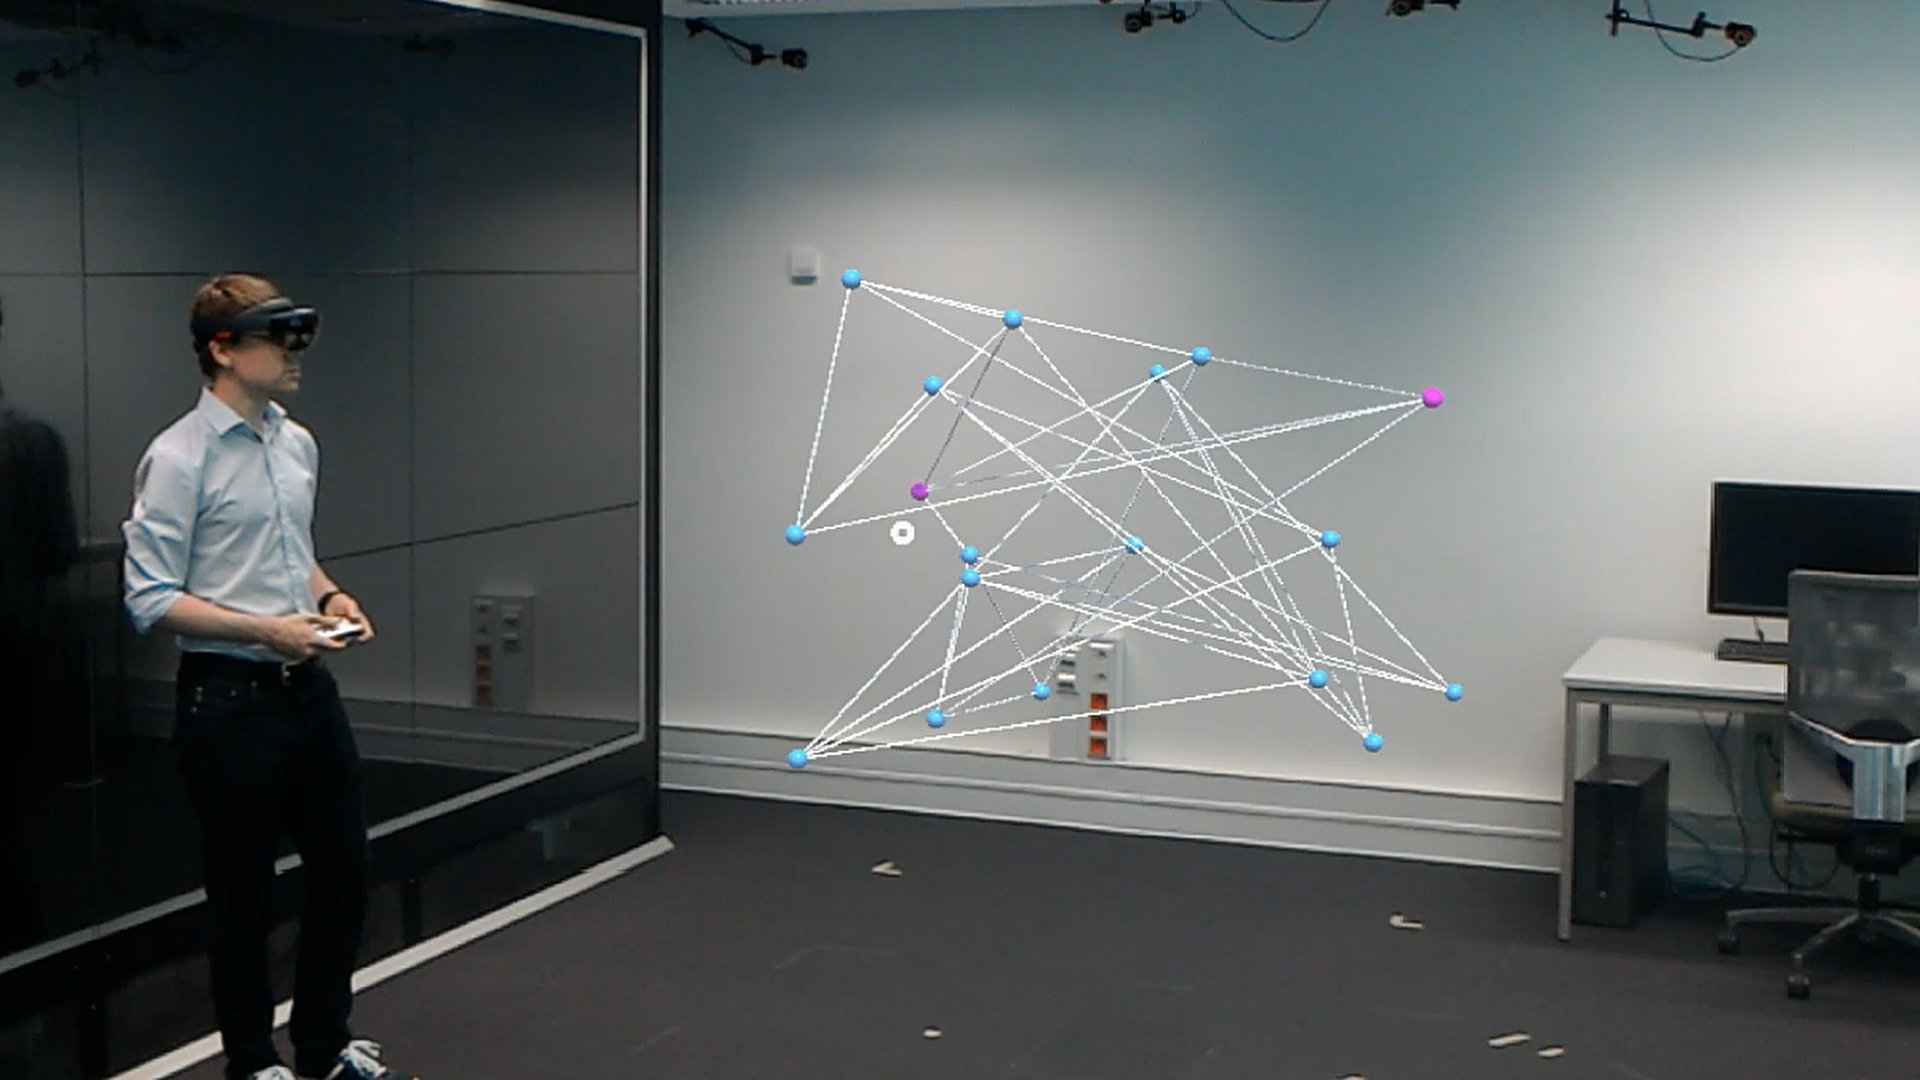 Thumbnail for the accompanying video of our article 'Augmented Reality Graph Visualization', showing a researcher using a HoloLens to explore an AR network visualization.